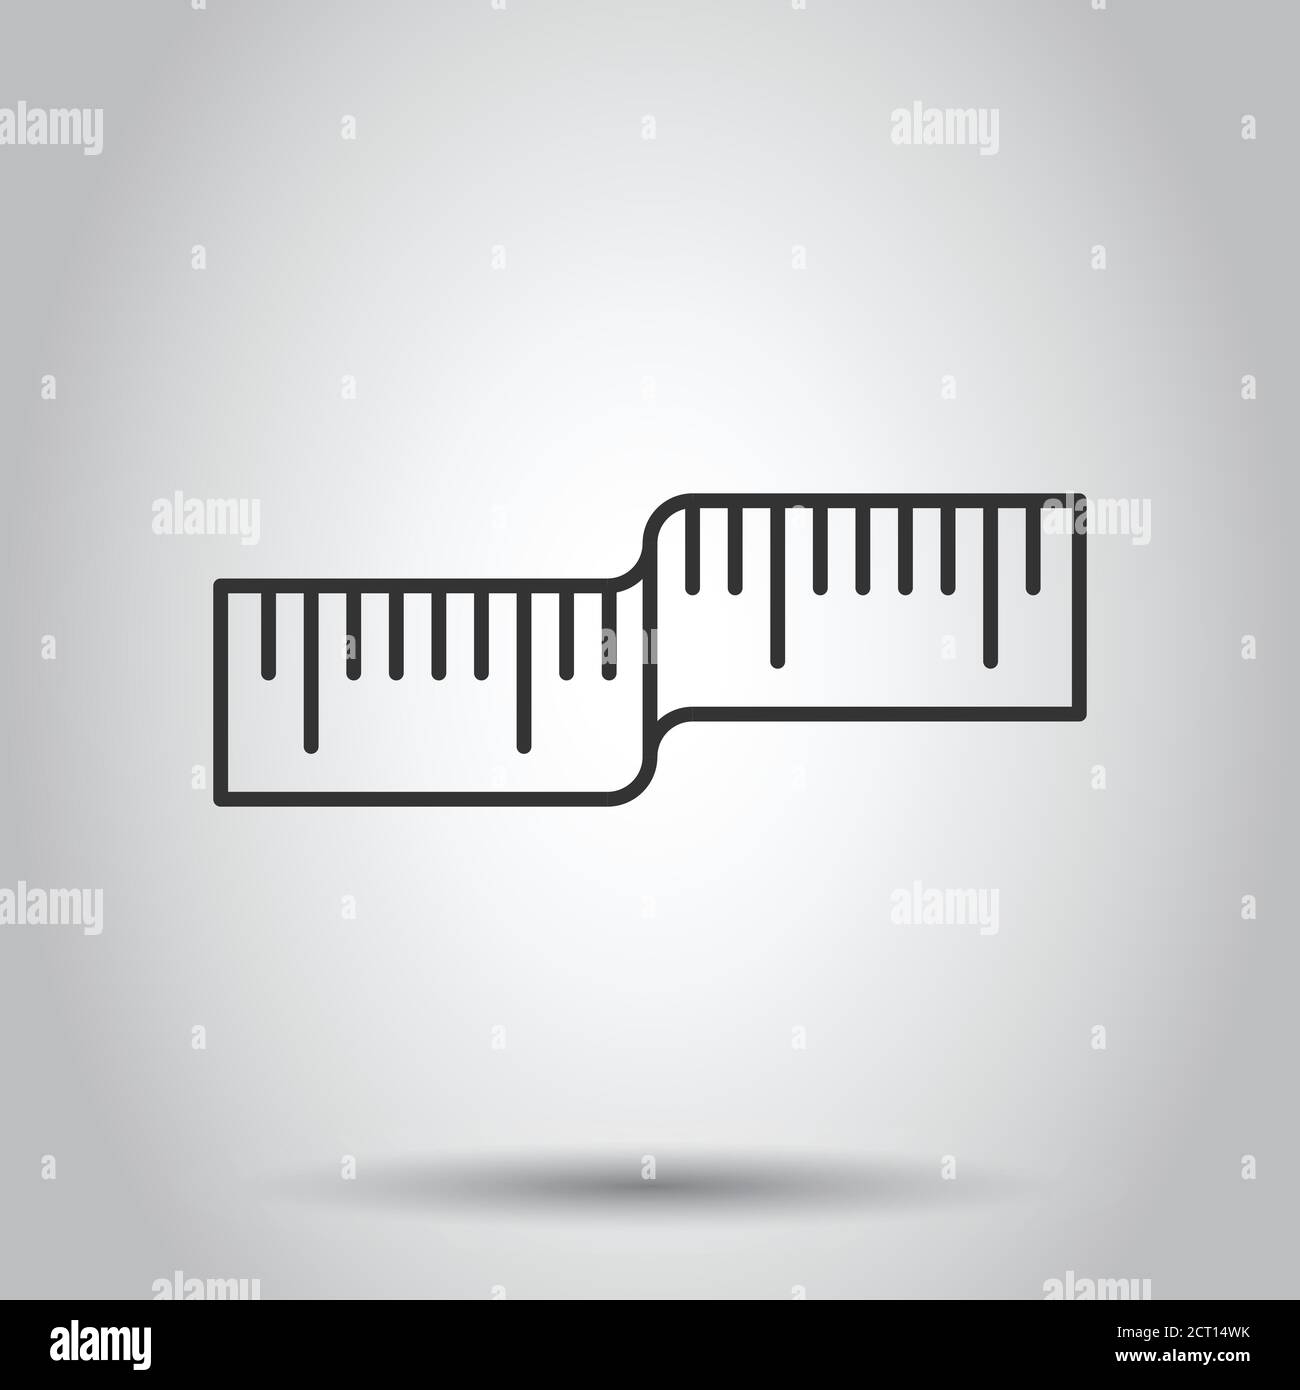 https://c8.alamy.com/comp/2CT14WK/measure-tape-icon-in-flat-style-ruler-sign-vector-illustration-on-white-isolated-background-meter-business-concept-2CT14WK.jpg